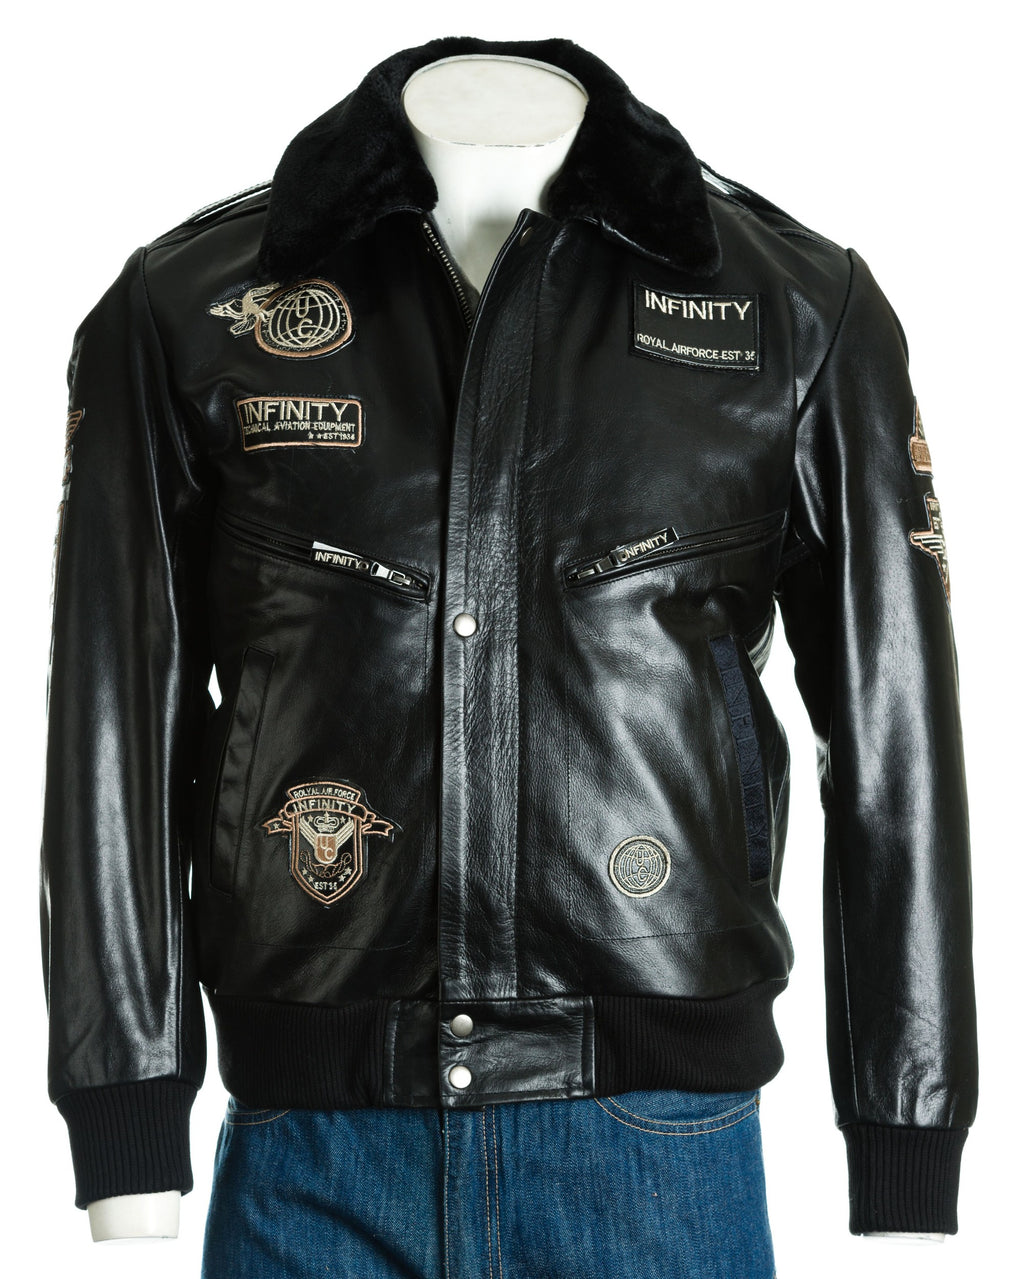 Men's Black Aviator Pilot Flight A2 Style Leather Jacket With Patch Detail And Detachable Faux Fur Collar: Giuseppe